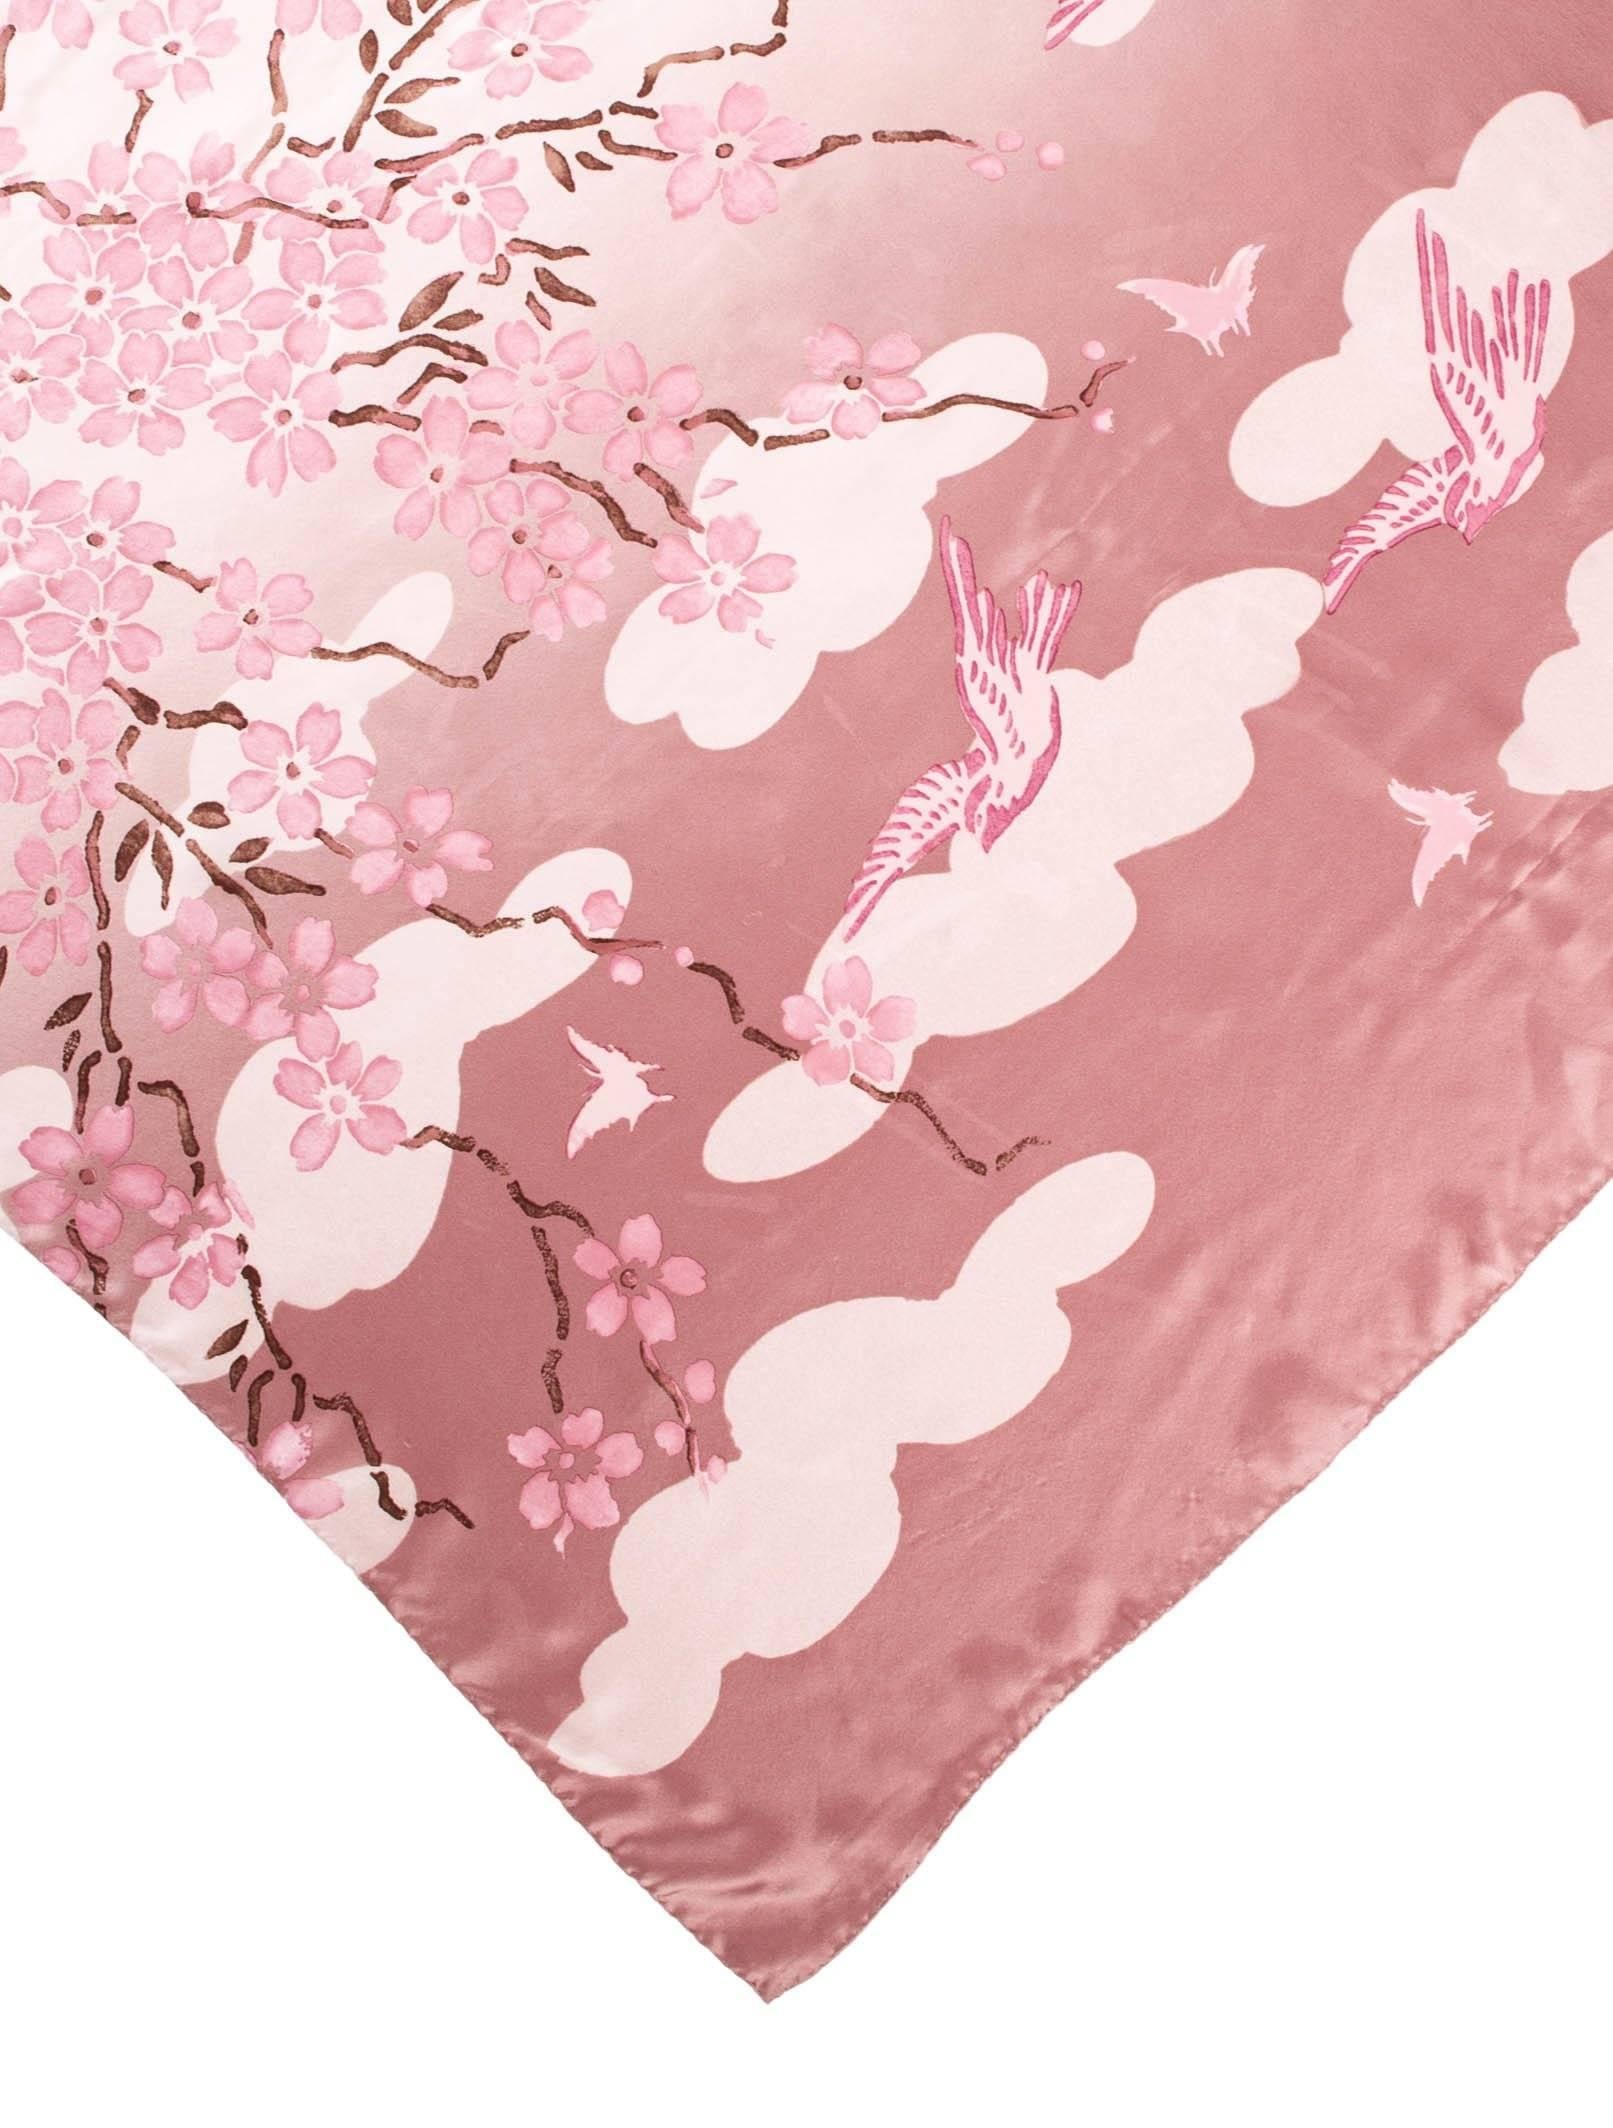 Gucci at Milan Fashion Week Spring 2003

Pink silk scarf with Japanese crane and cherry blossom print. 